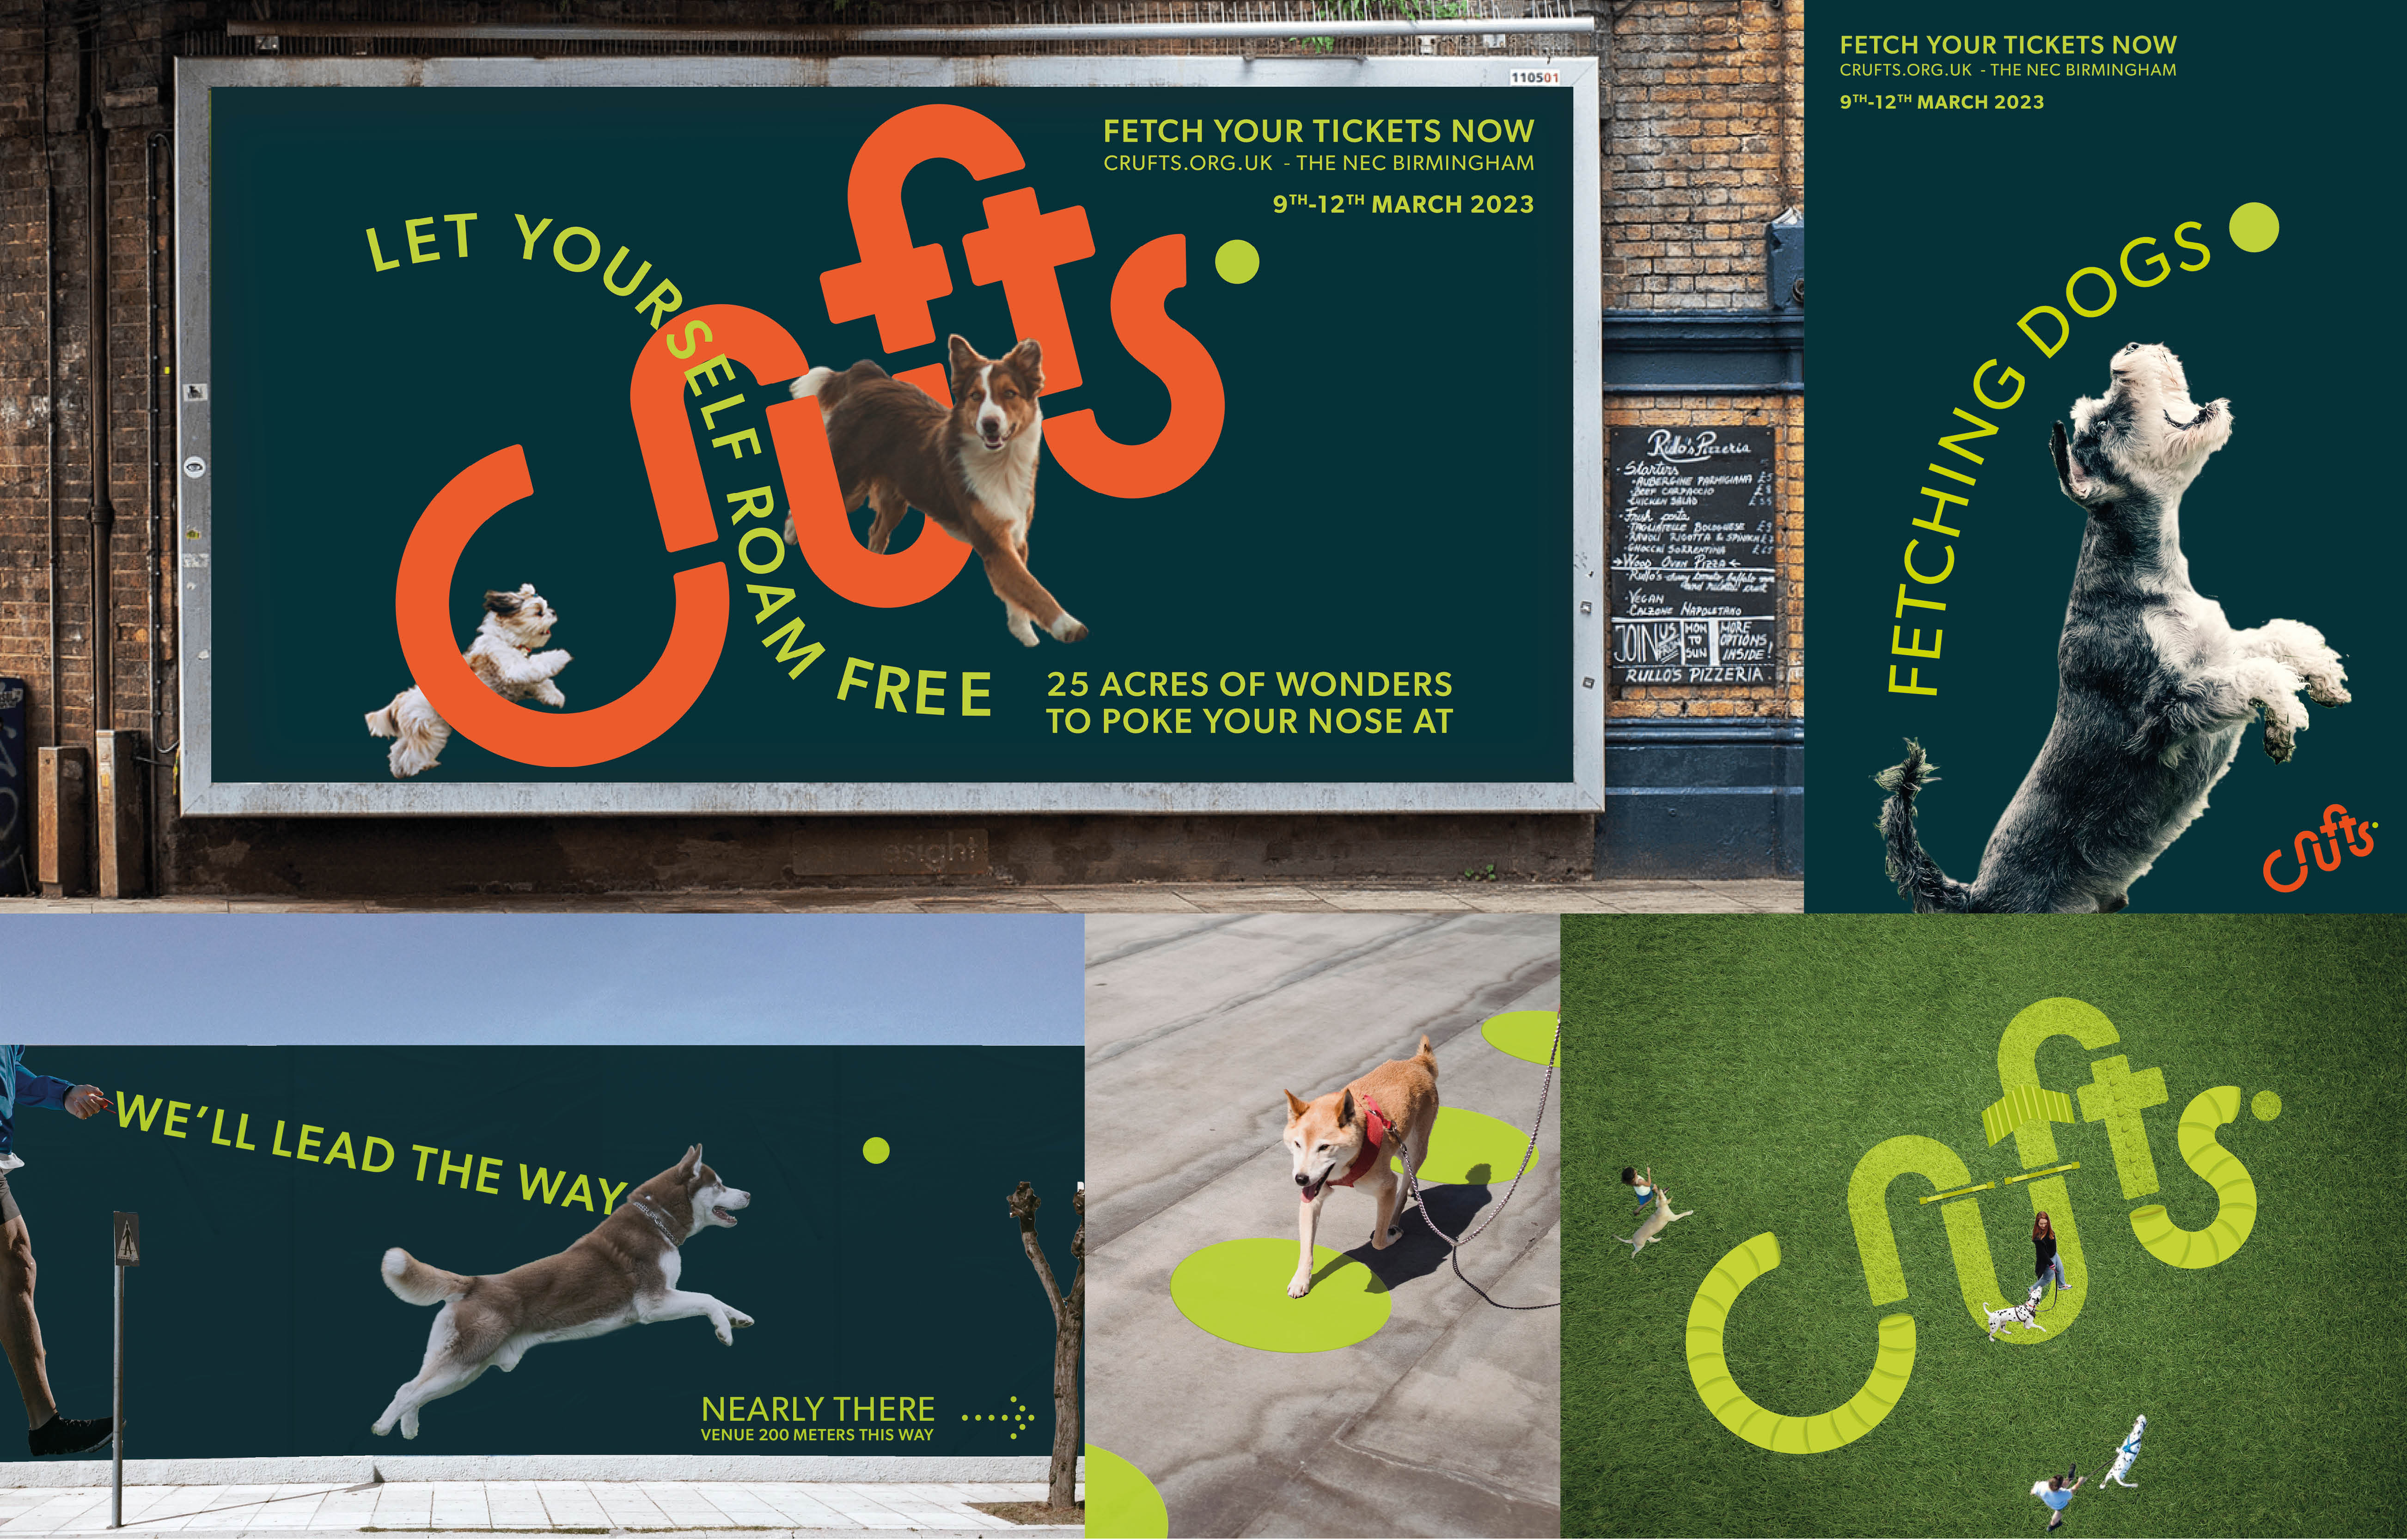 Visual Identity mocked up onto billboard and as posters for crufts. Including wavy crufts logo and images of dogs chasing a light green dot.